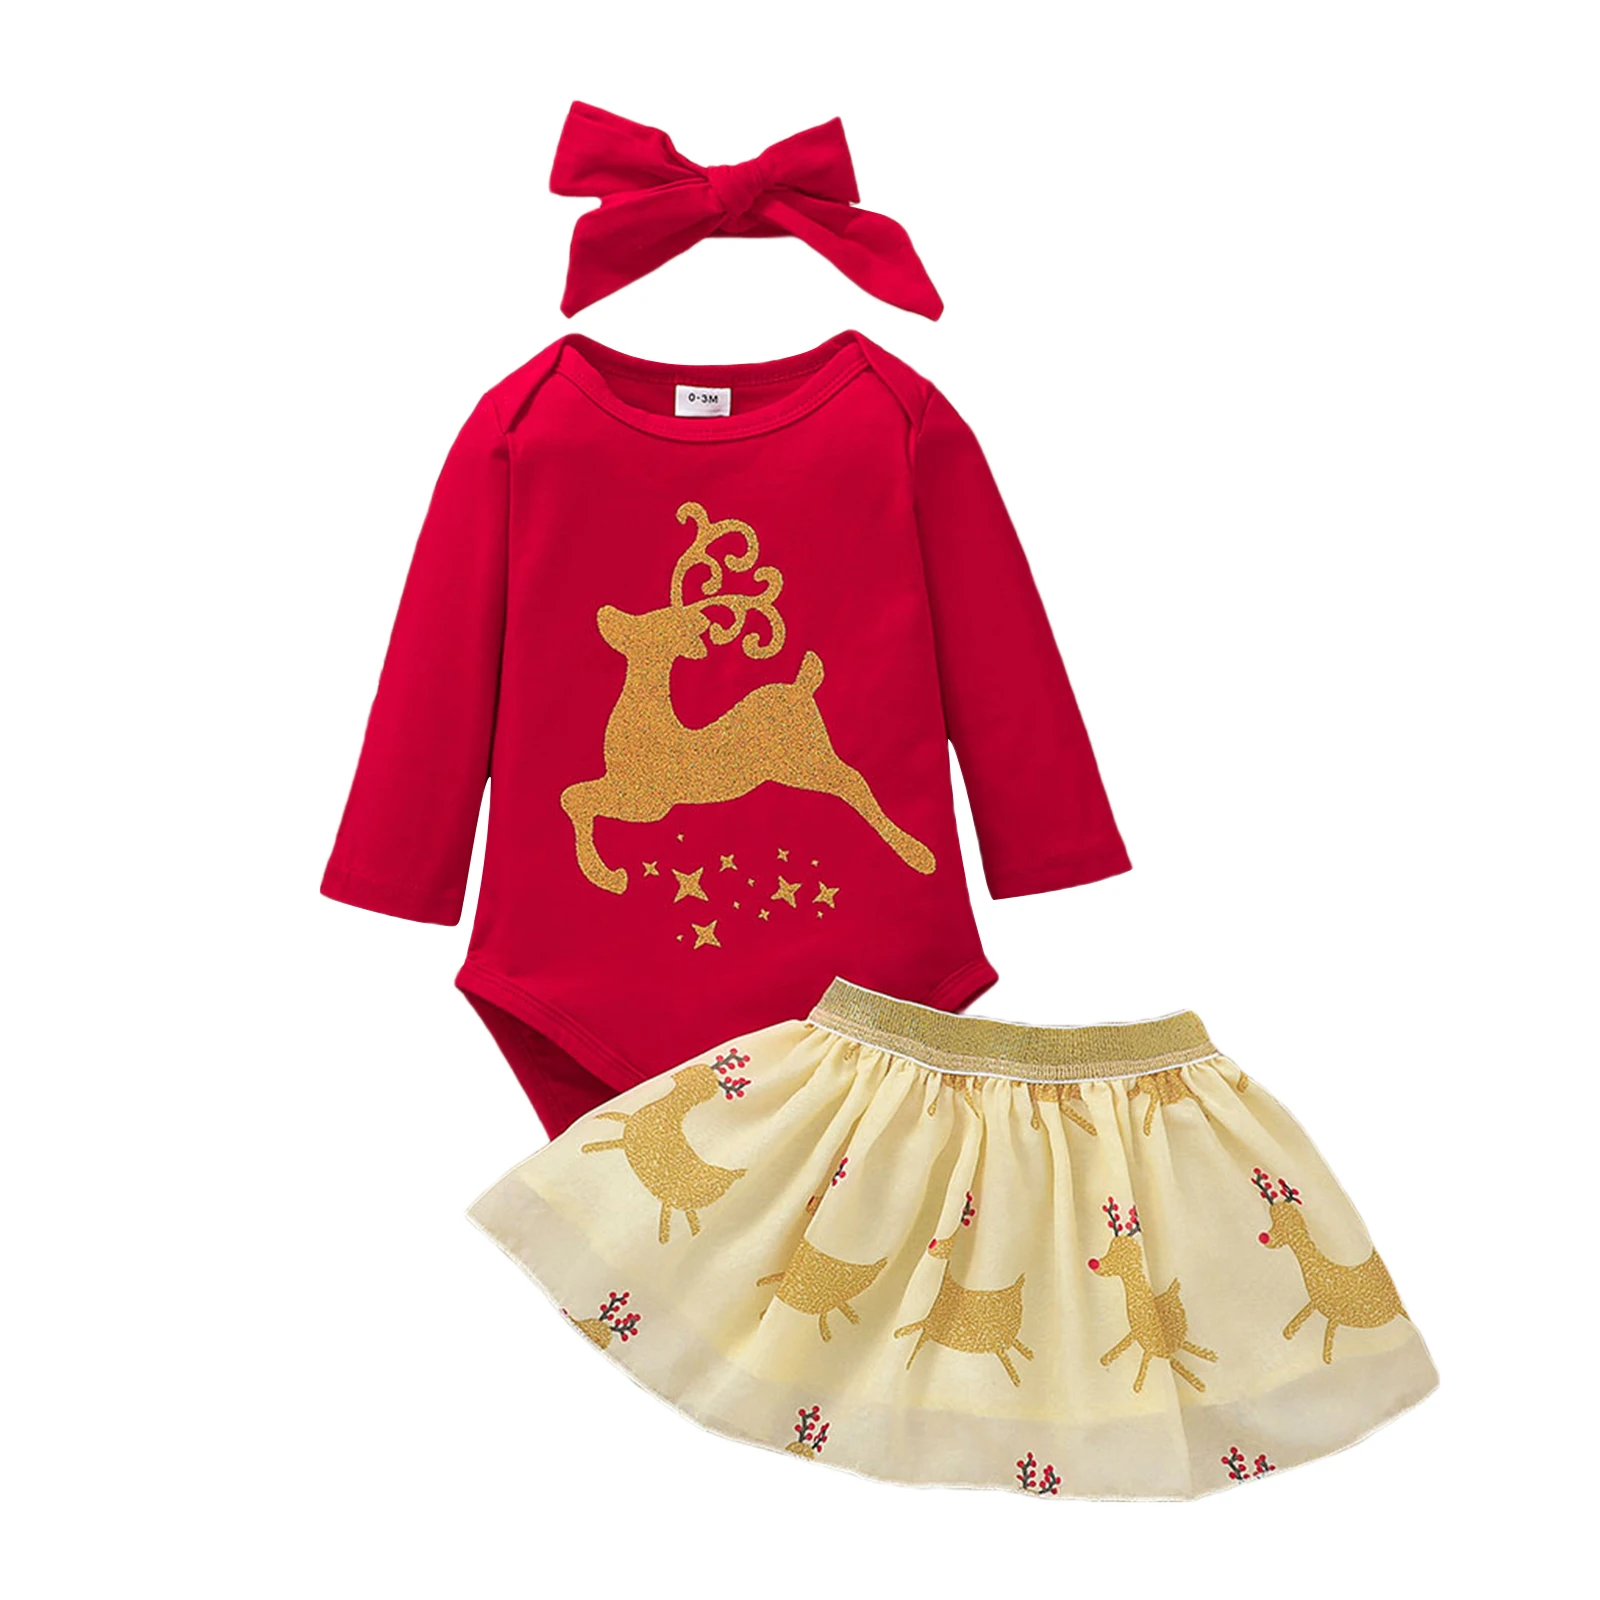 

Pudcoco 0-18M 3Pcs Christmas Costumes Cartoon Deer Print Red Bodysuit+Mesh A-Line Skirt+Headdress Clothes Outfit Sets